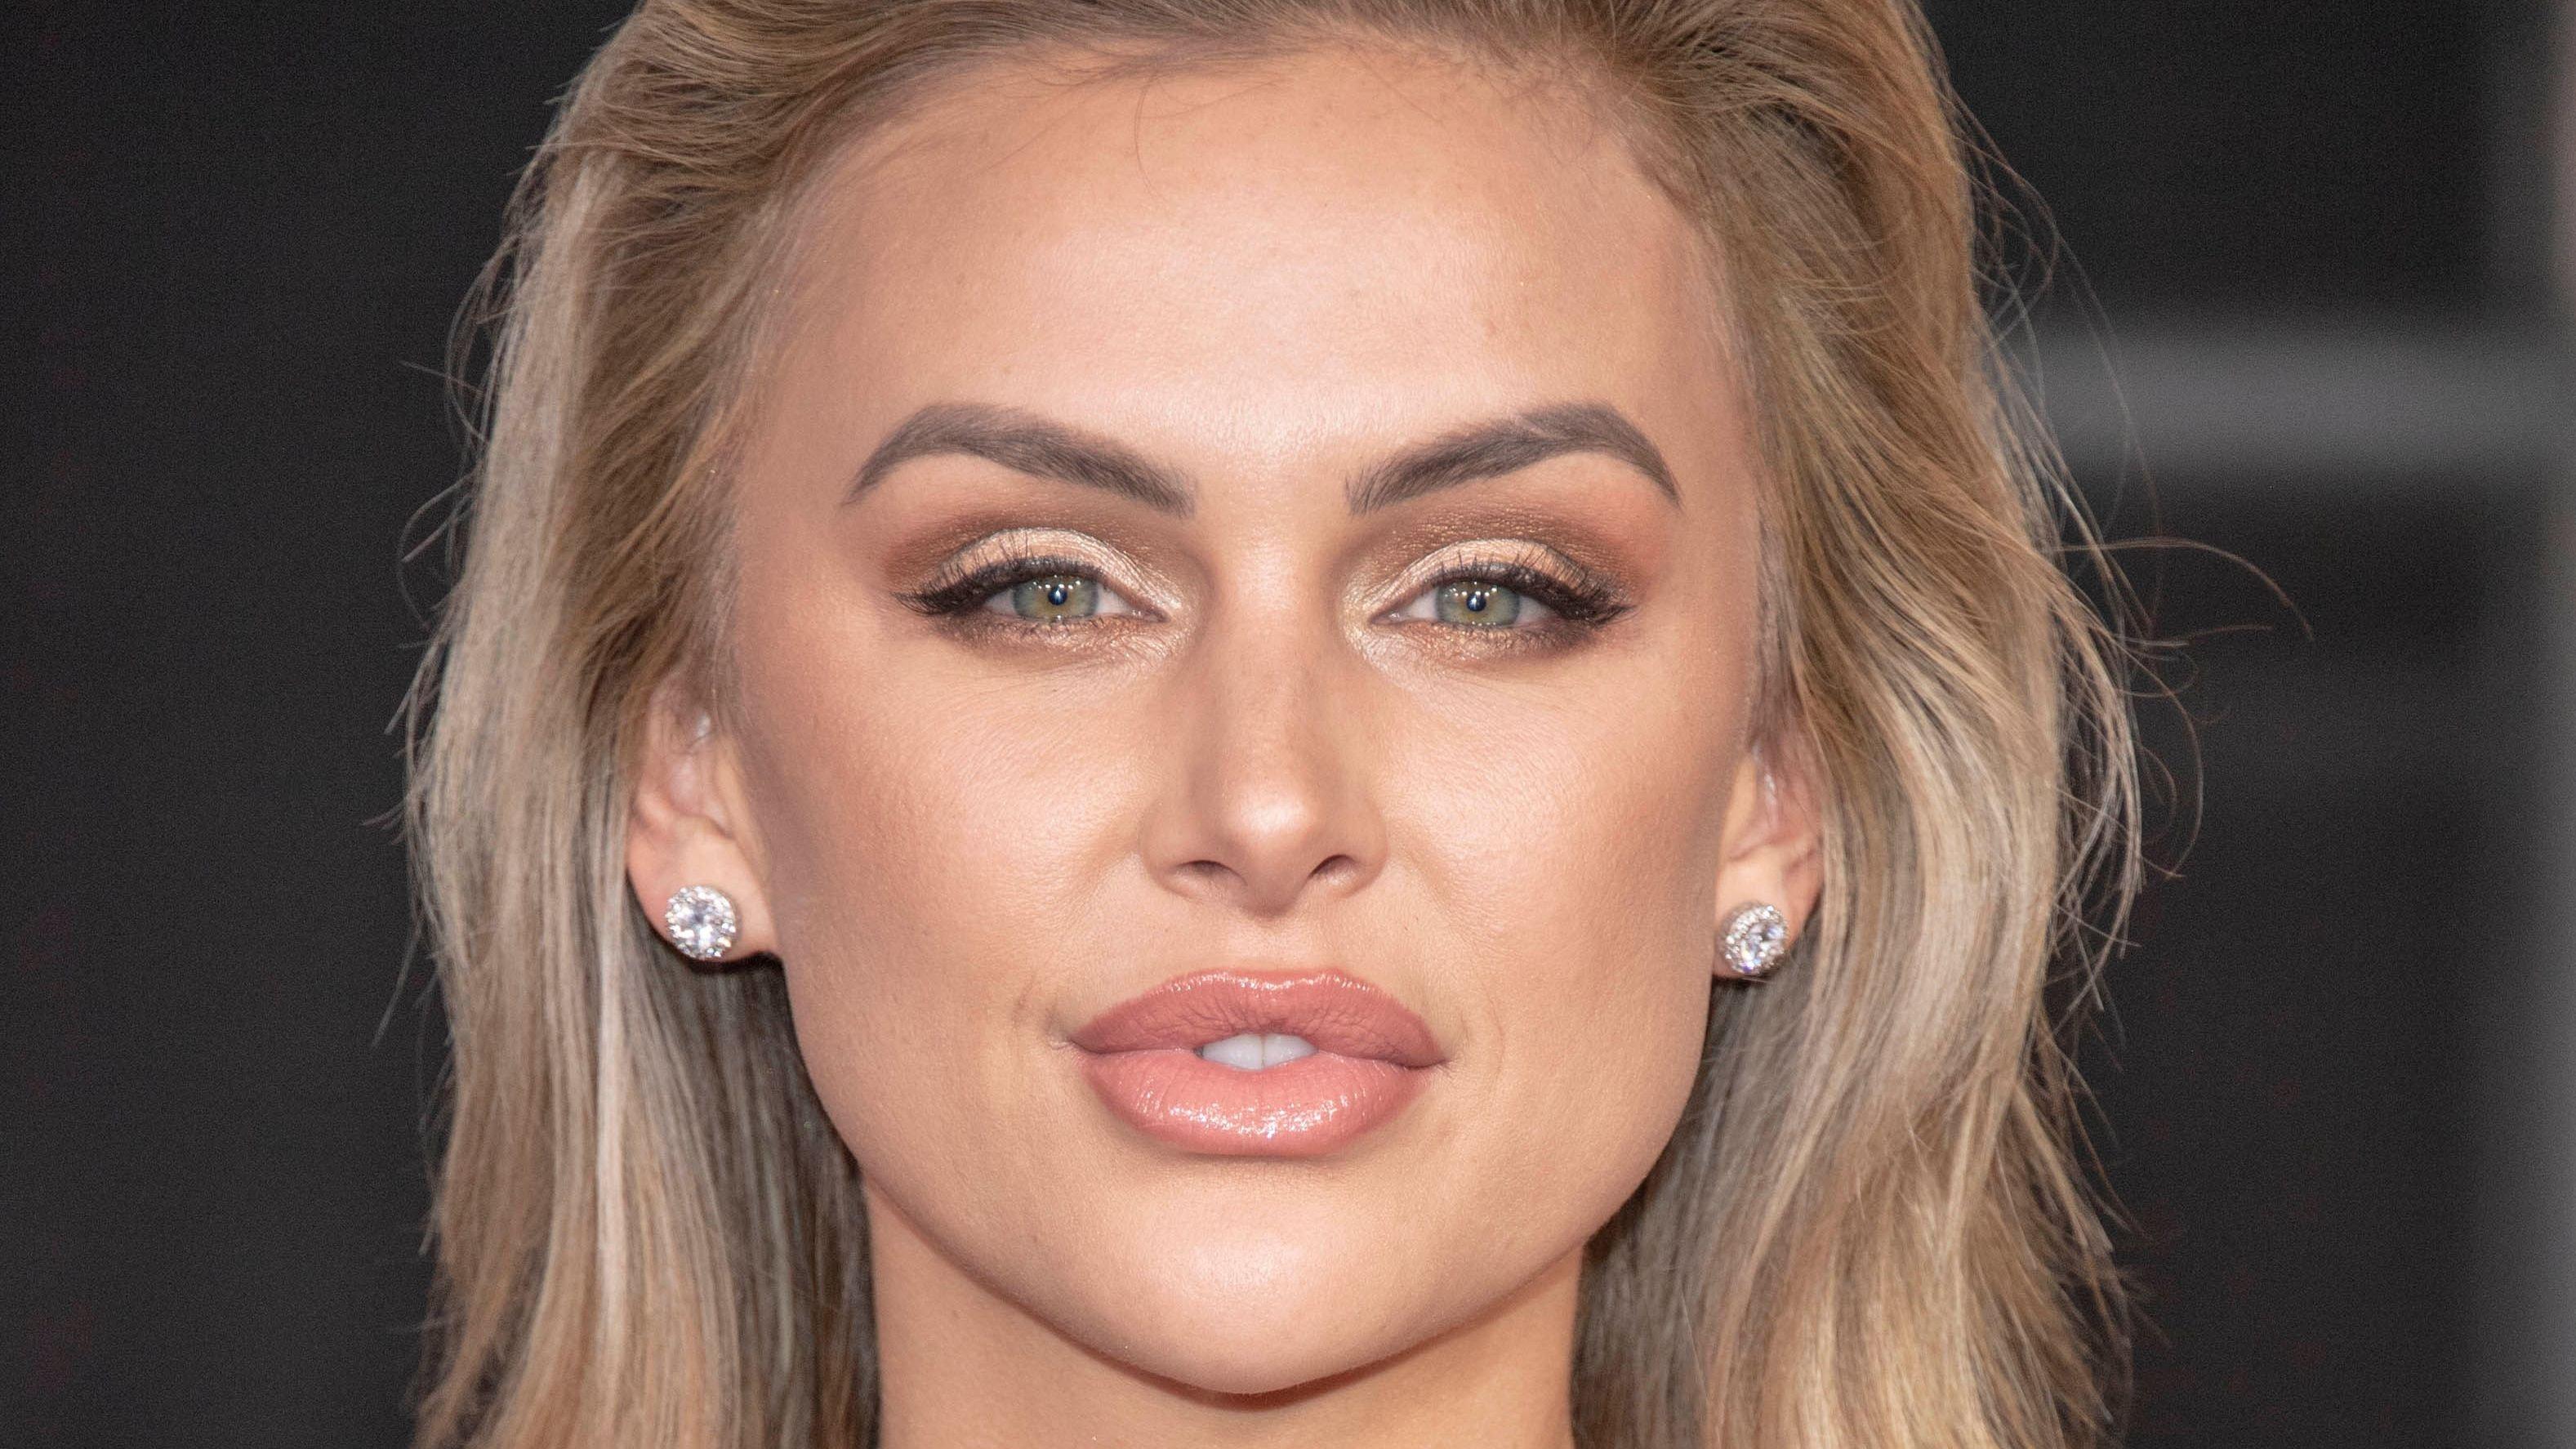 Lala Kent with dark eyeshadow and hair brushed back